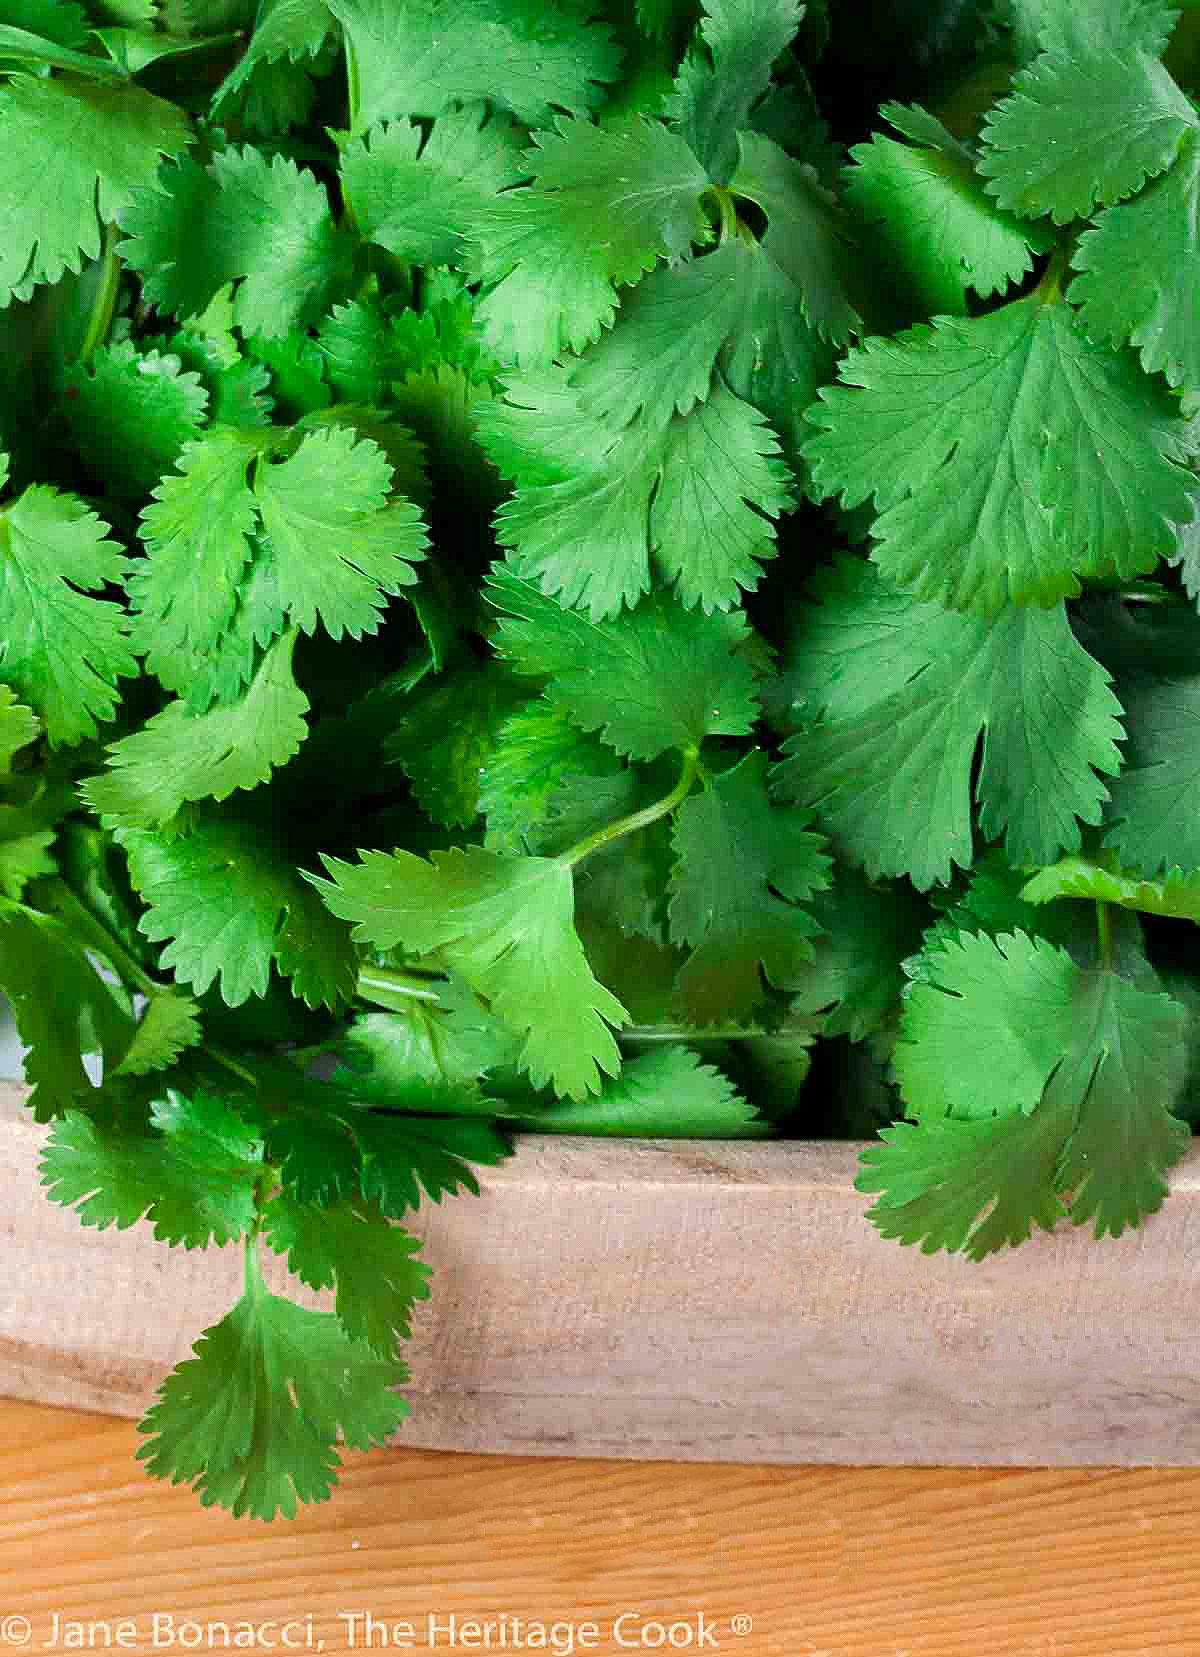 Pile of cilantro which is more delicate and feathery than Italian parsley. 